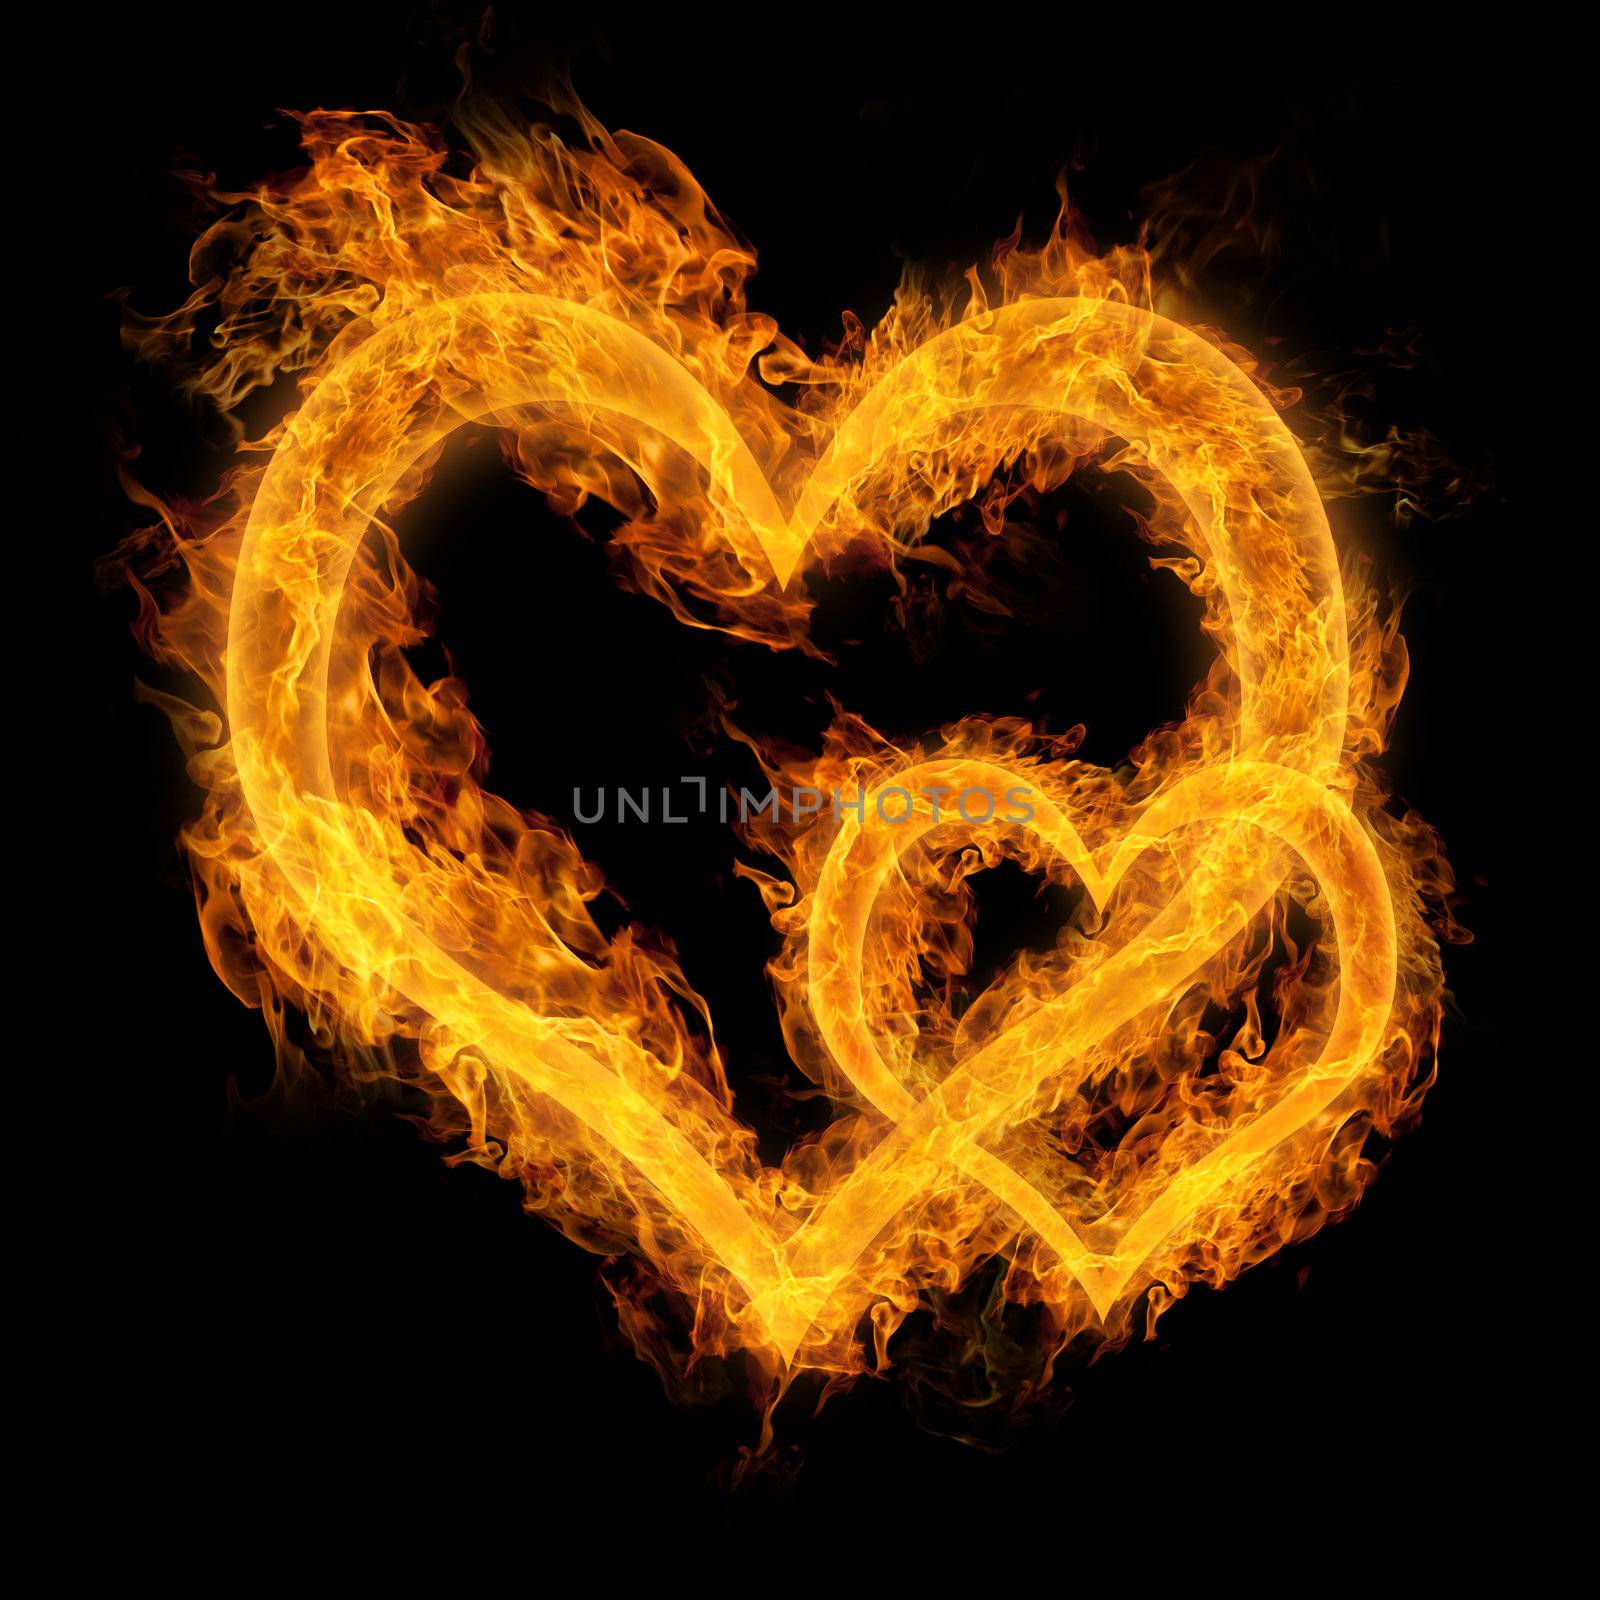 Heart made of fire on black background